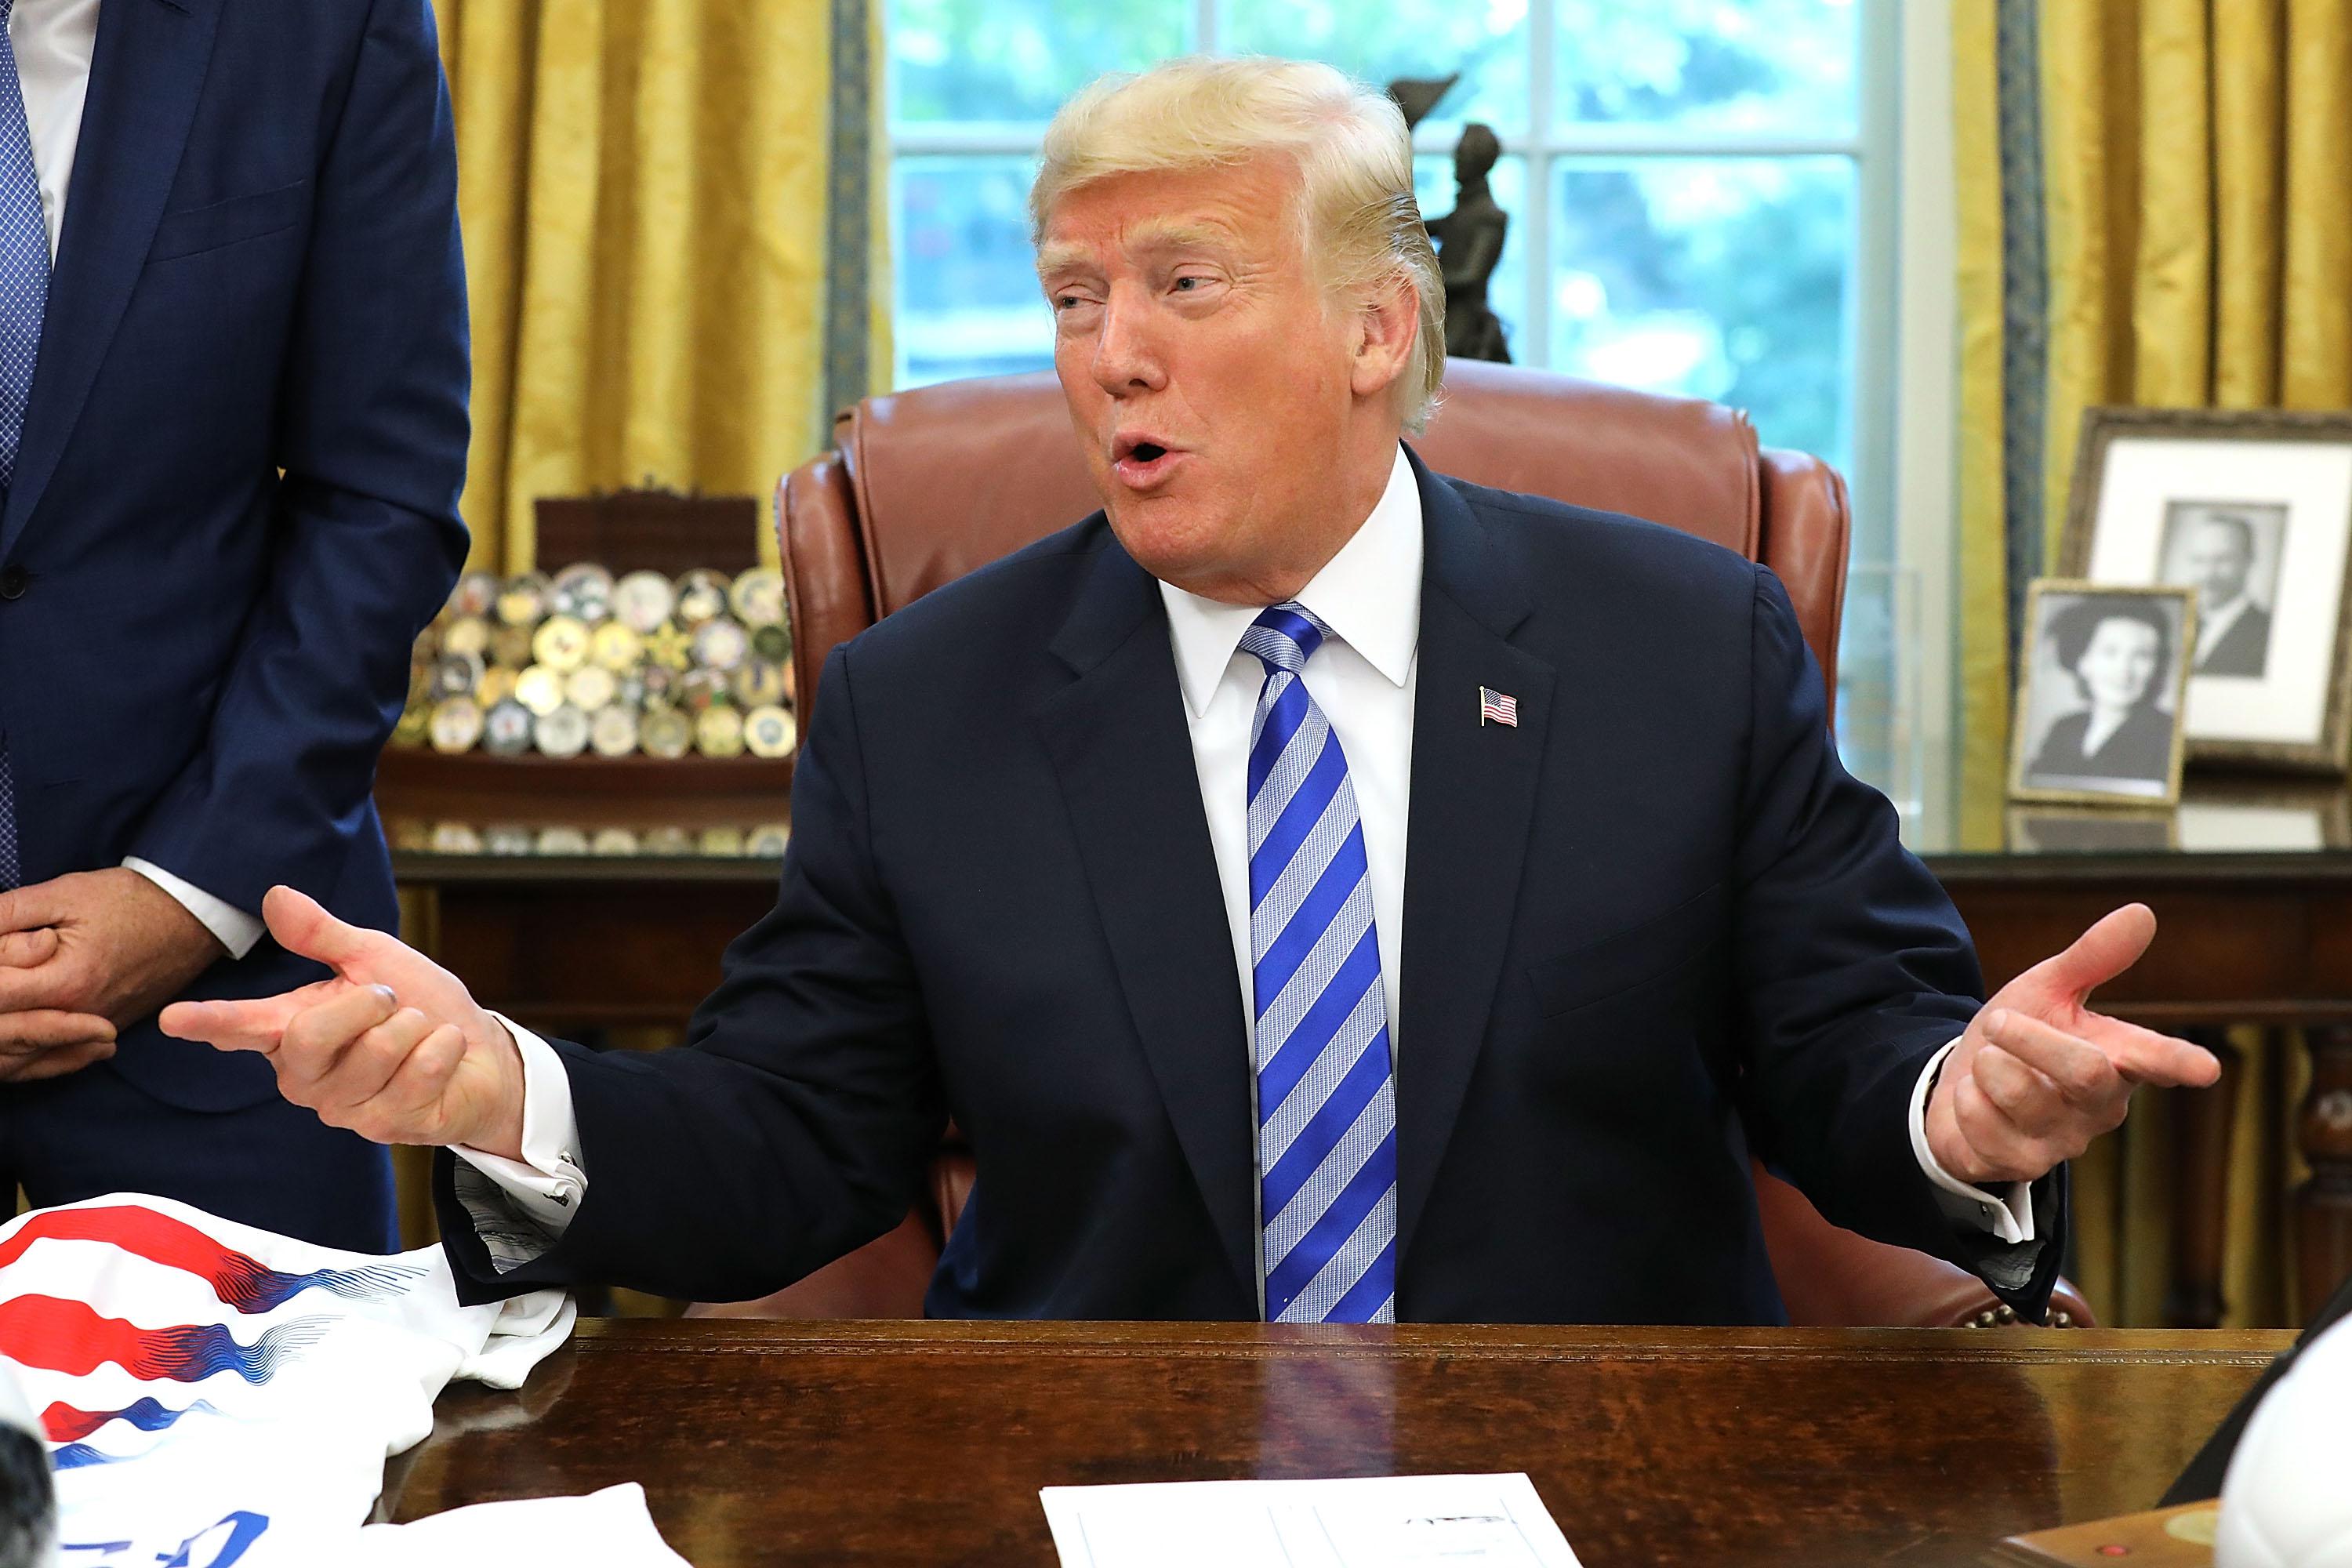 Donald Trump holds his arms out in the Oval Office